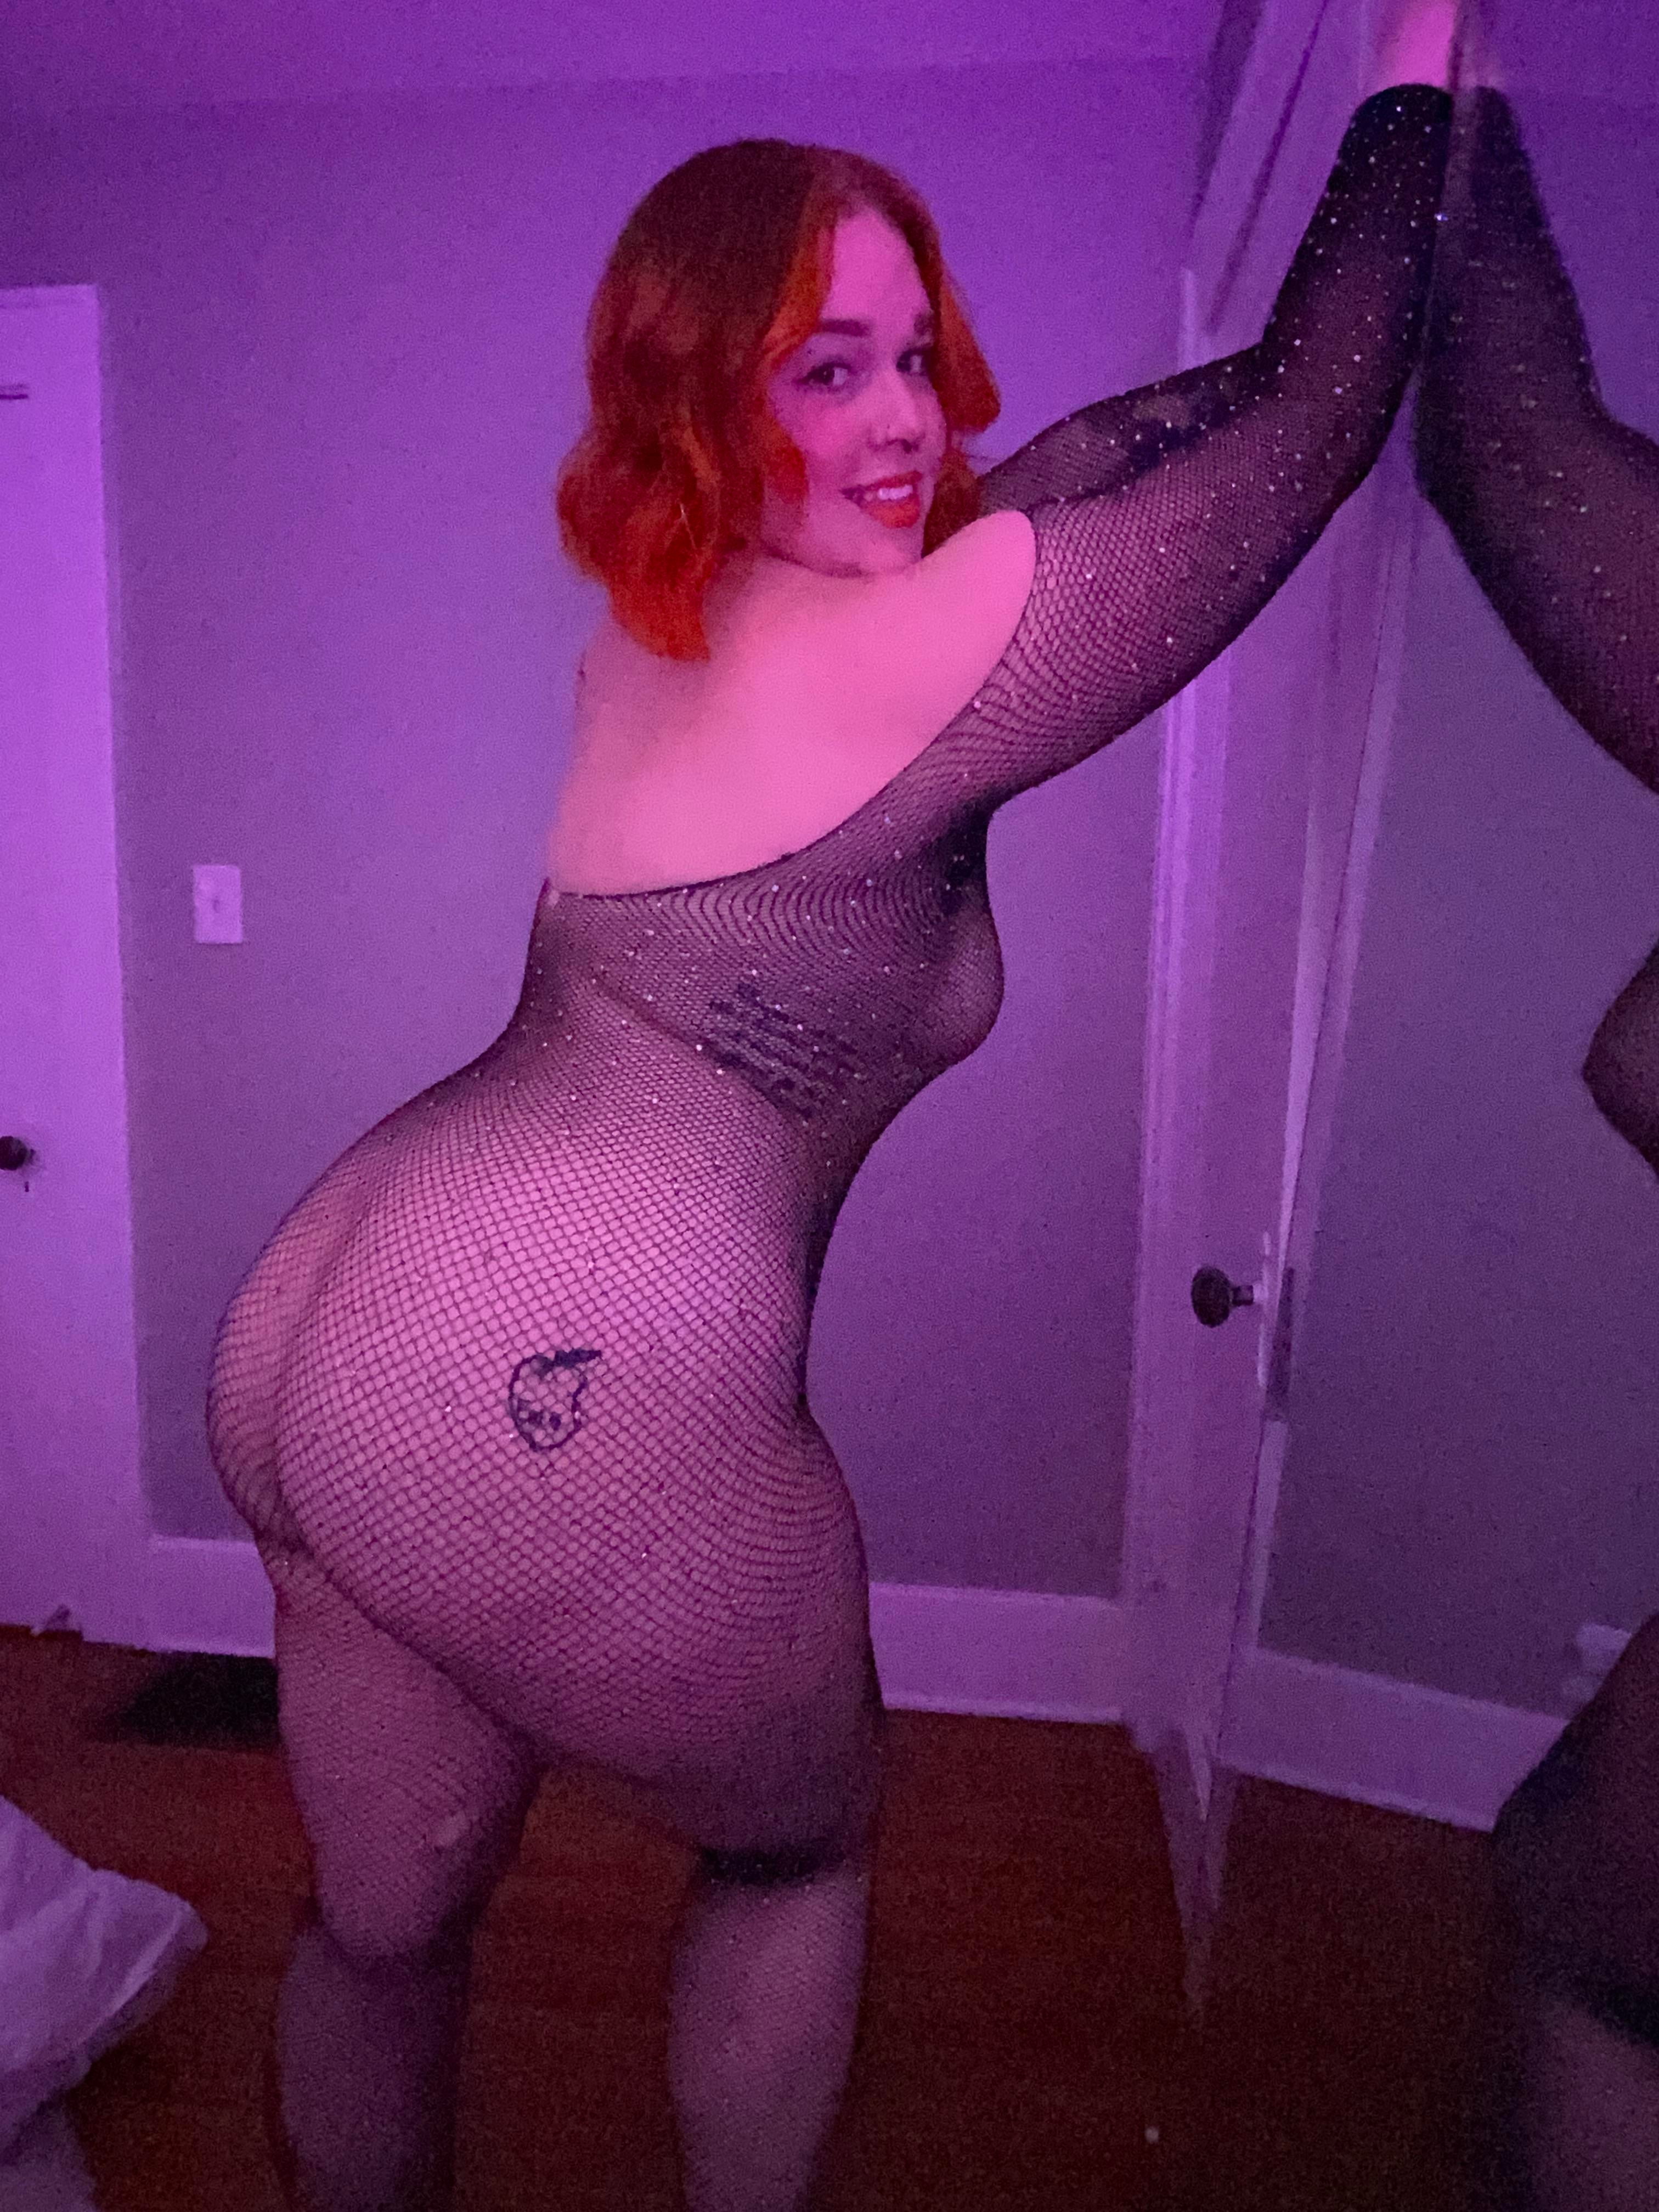 Neon hair and a thick ass What more could you